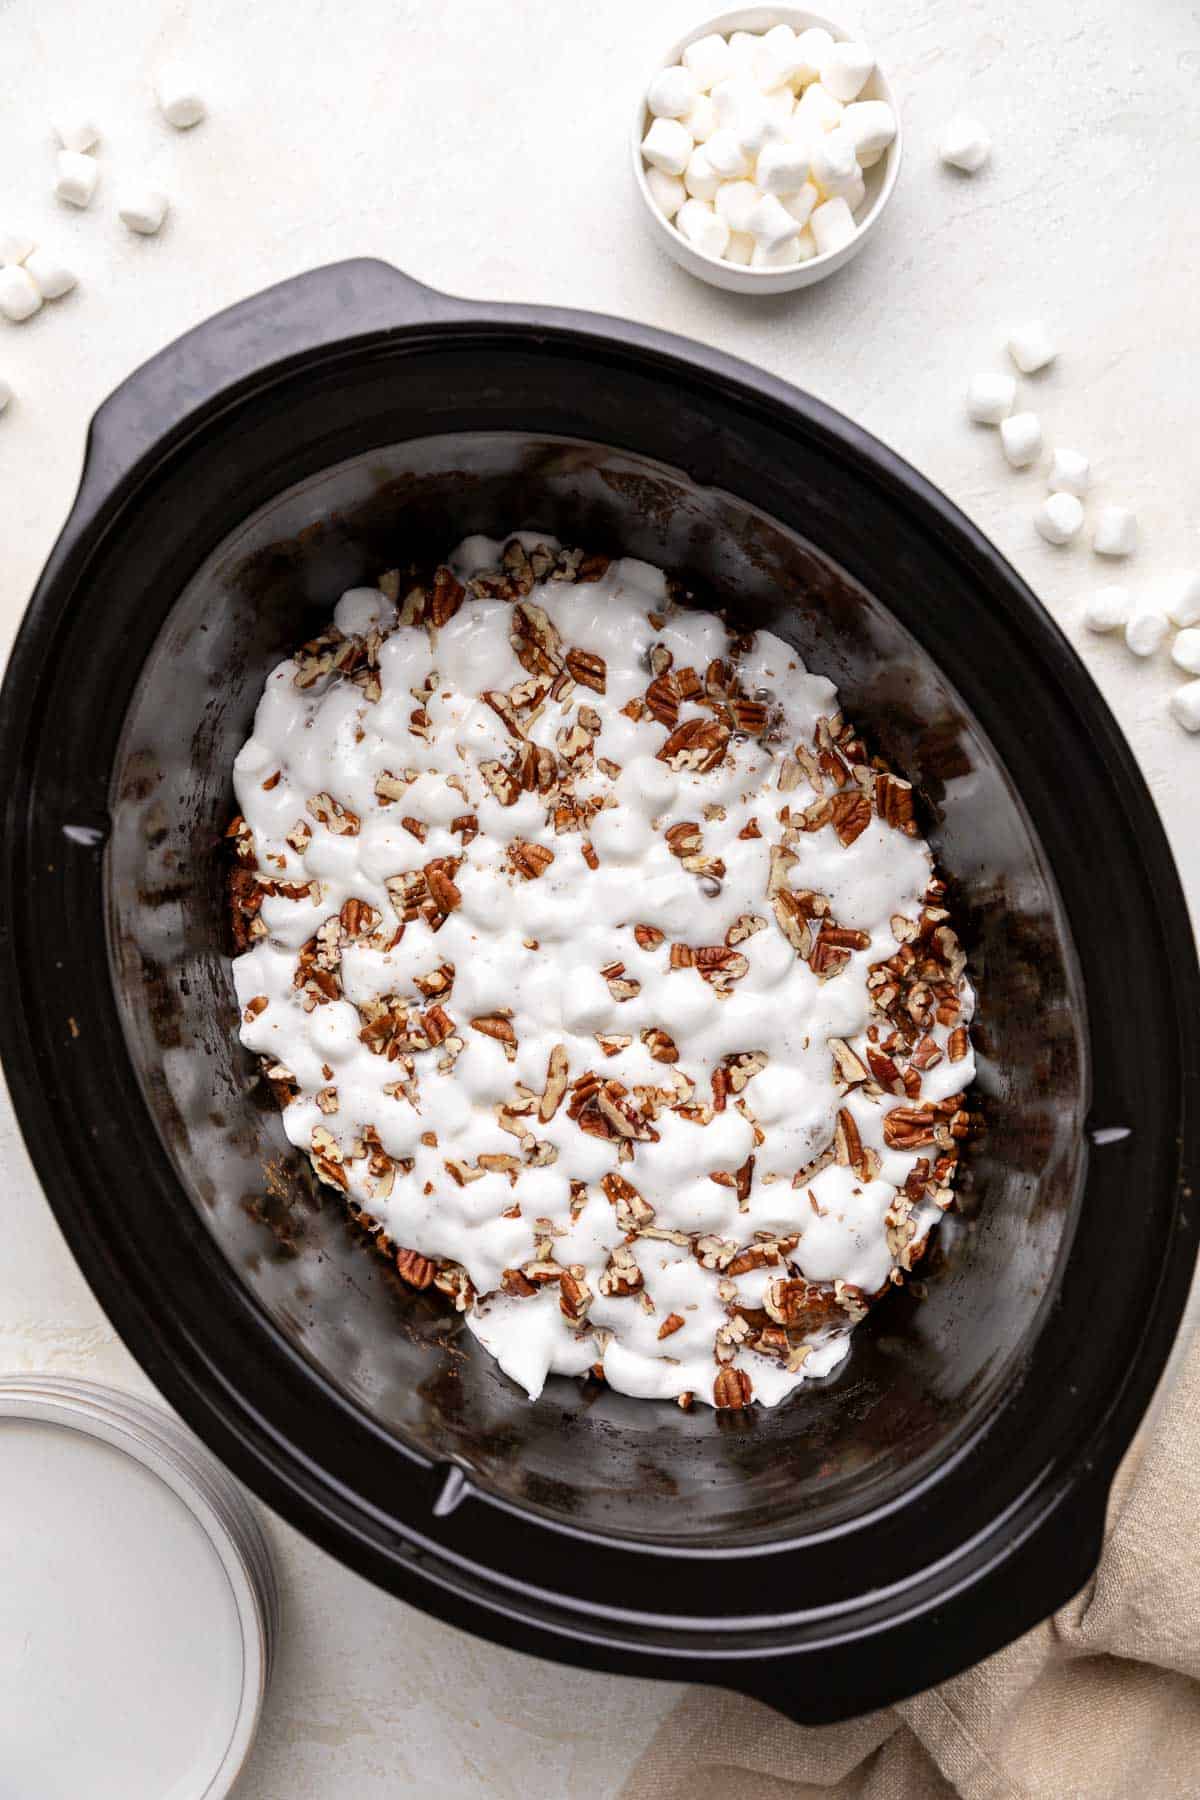 Top down view of melted marshmallows and pecans in a slow cooker.